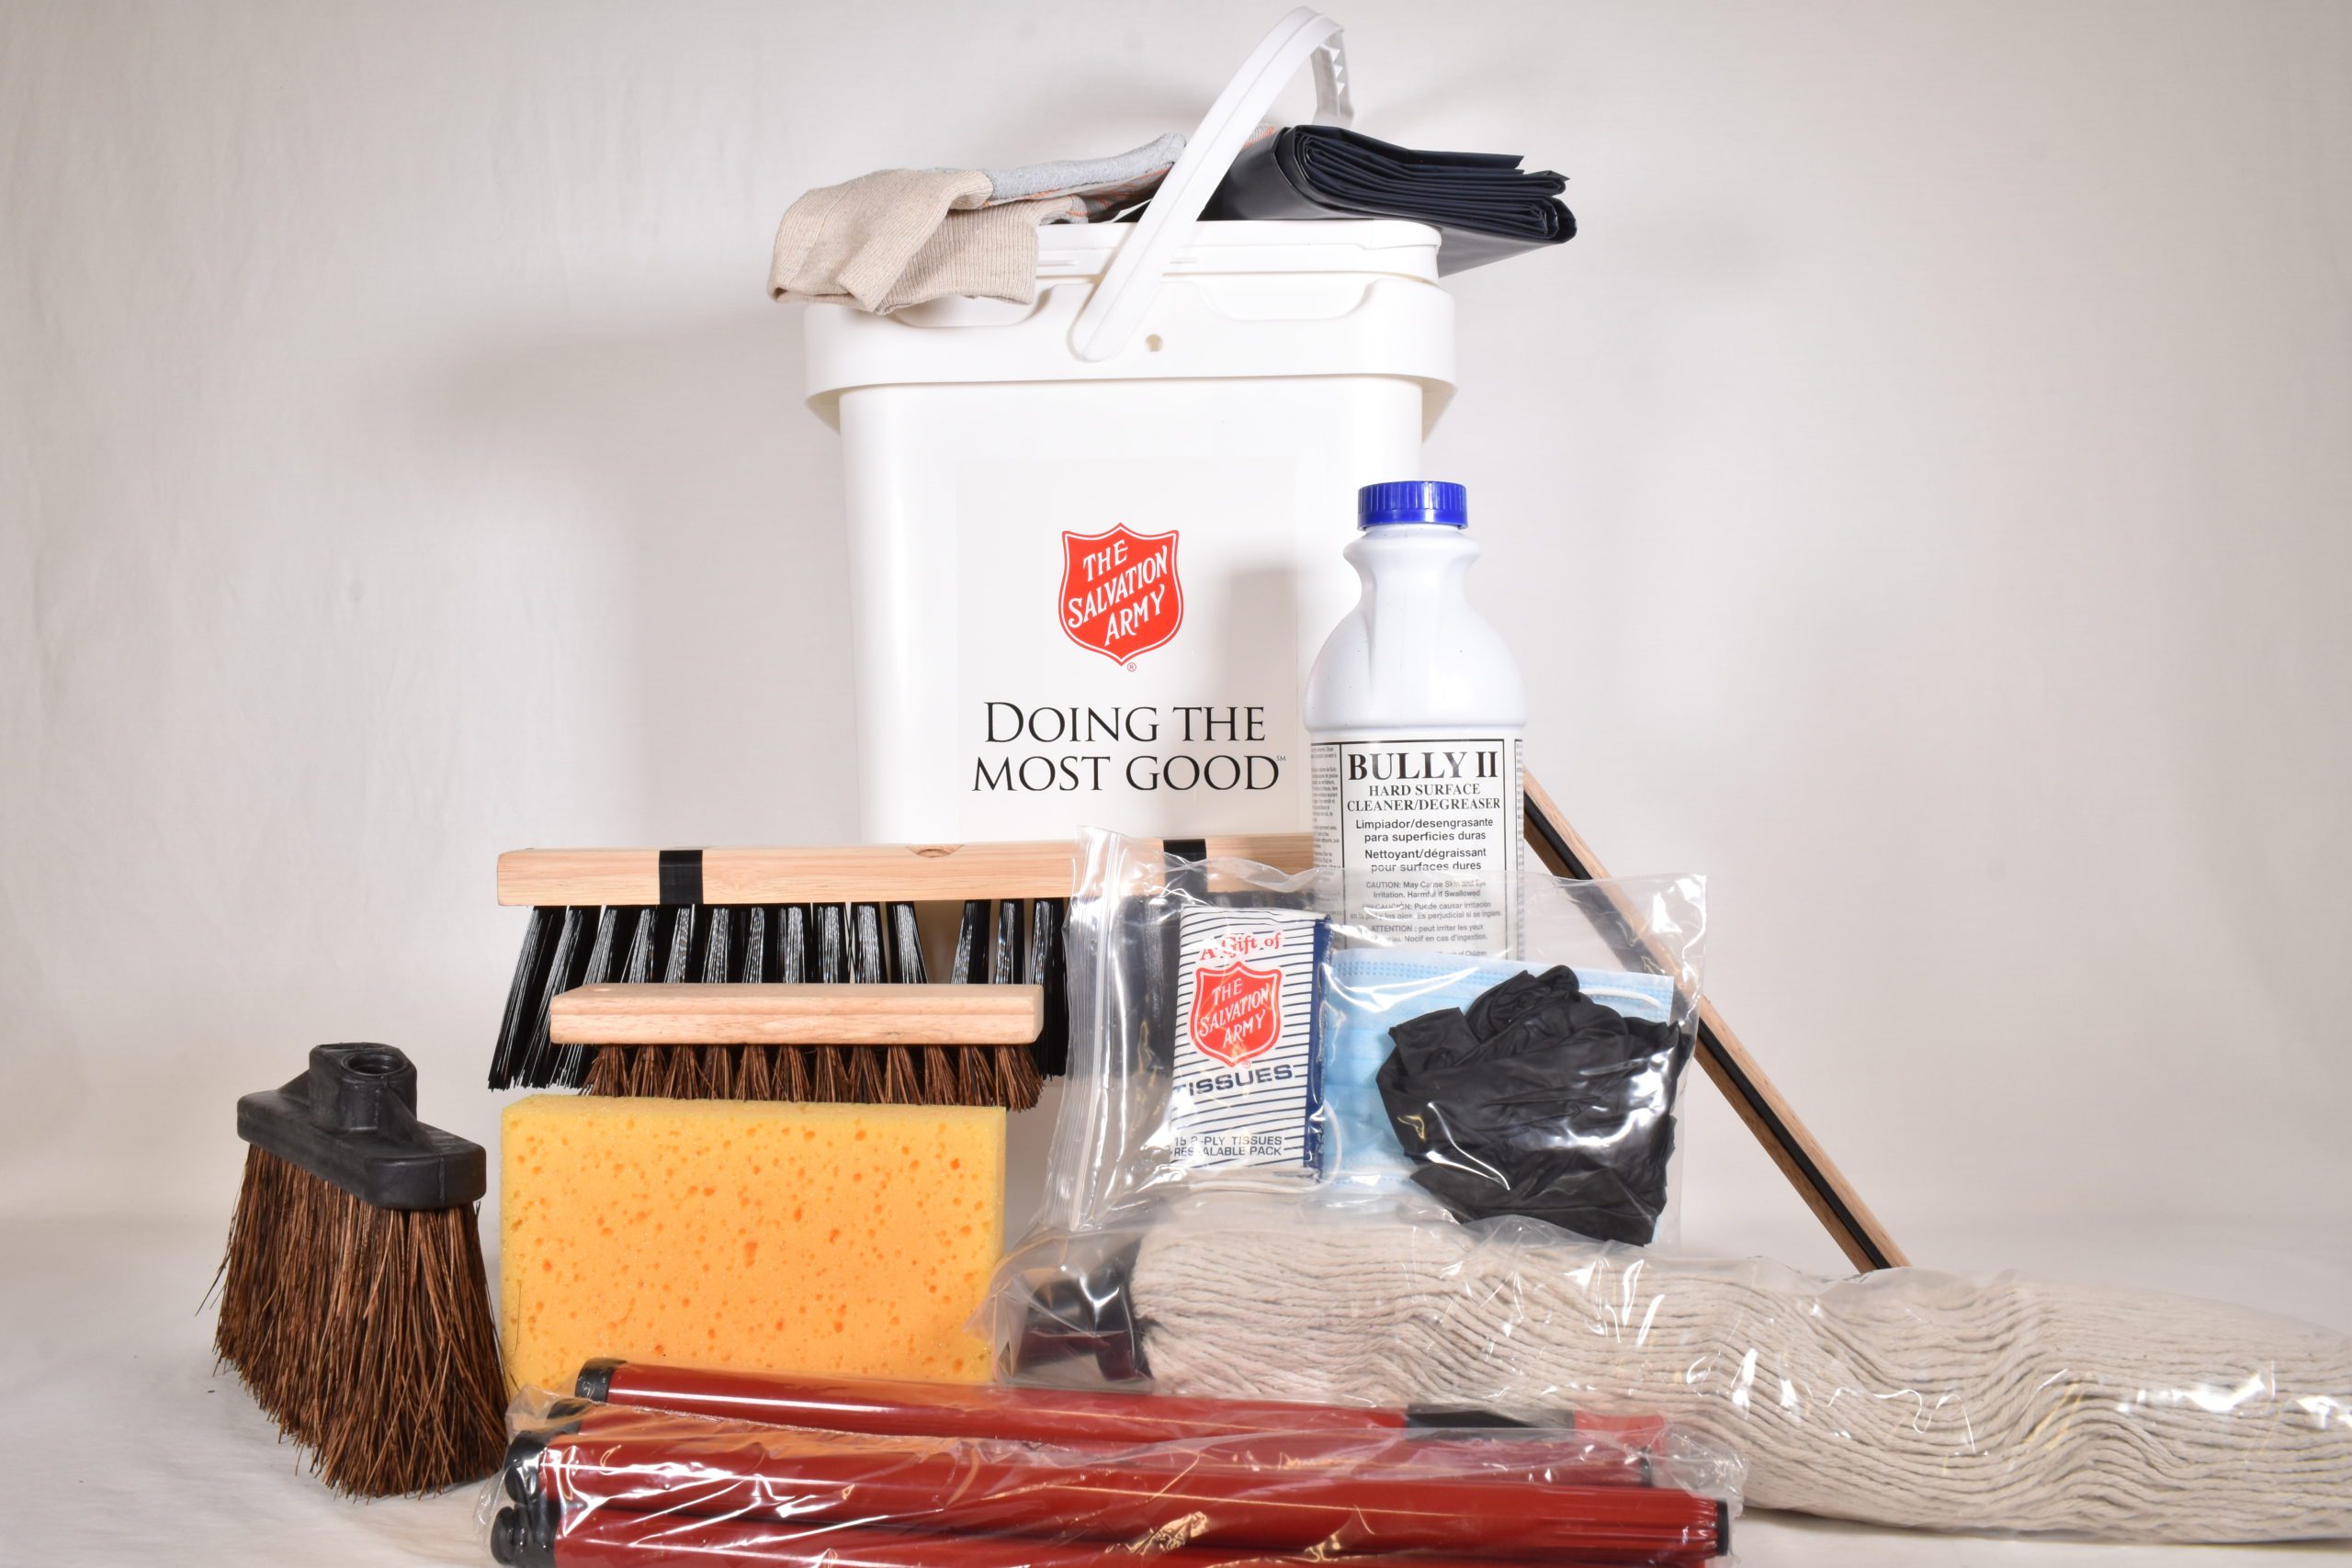 A white plastic rectangular 40 gallon pail with Salvation Army Red Shield logo and brand promise "Doing The Most Good." Arranged around the pail are several cleaning supplies including a disassembled mop, sponges, gloves, and bleach.